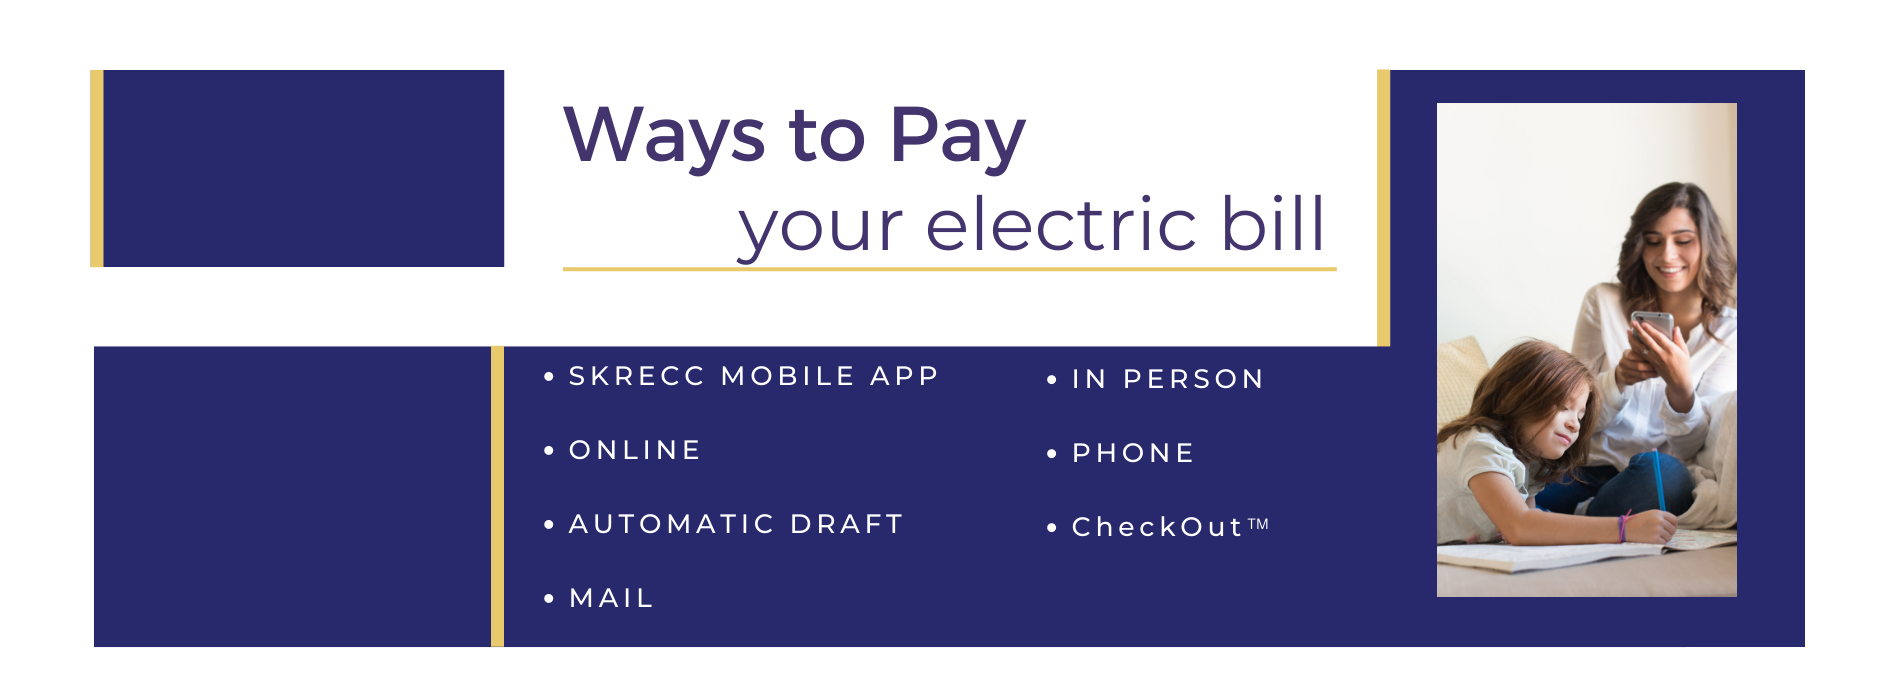 WAYS TO PAY